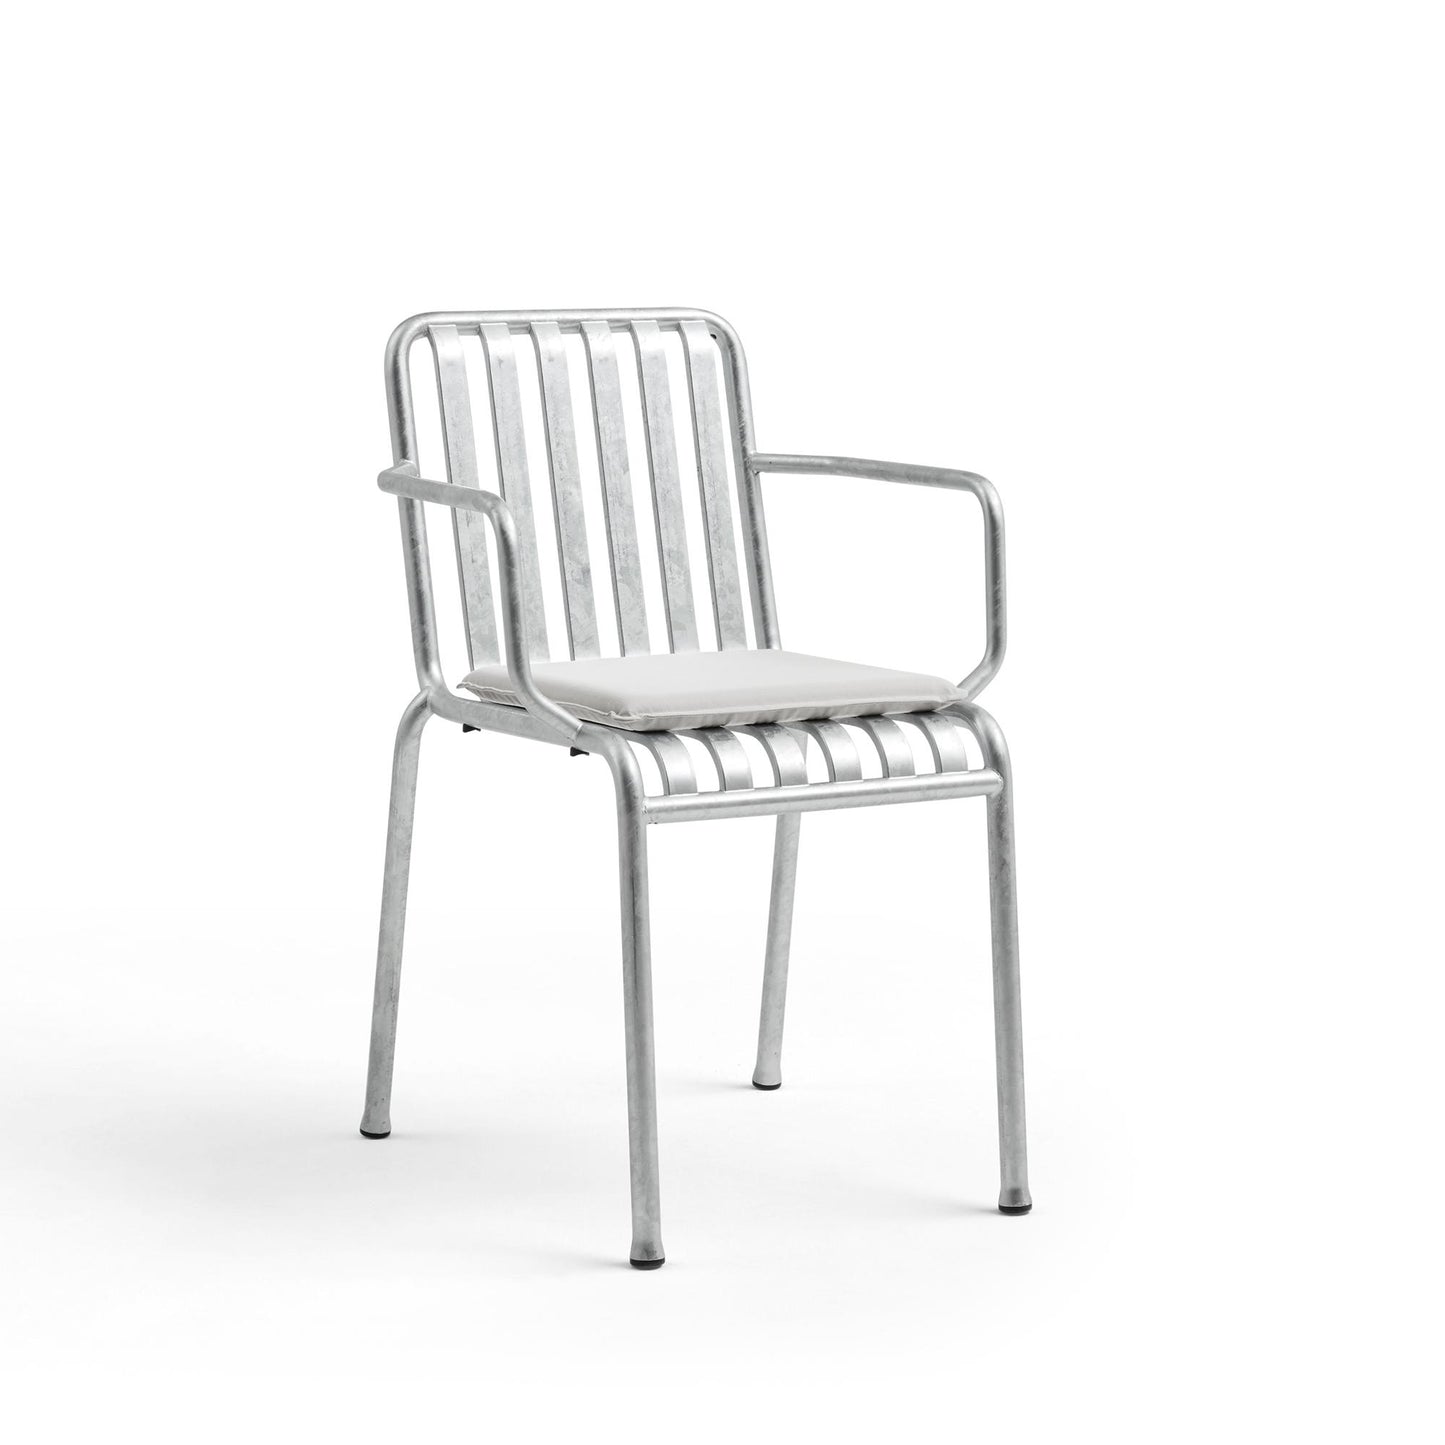 Palissade Chair with Armrest by HAY #Hot-dip Galvanized Steel